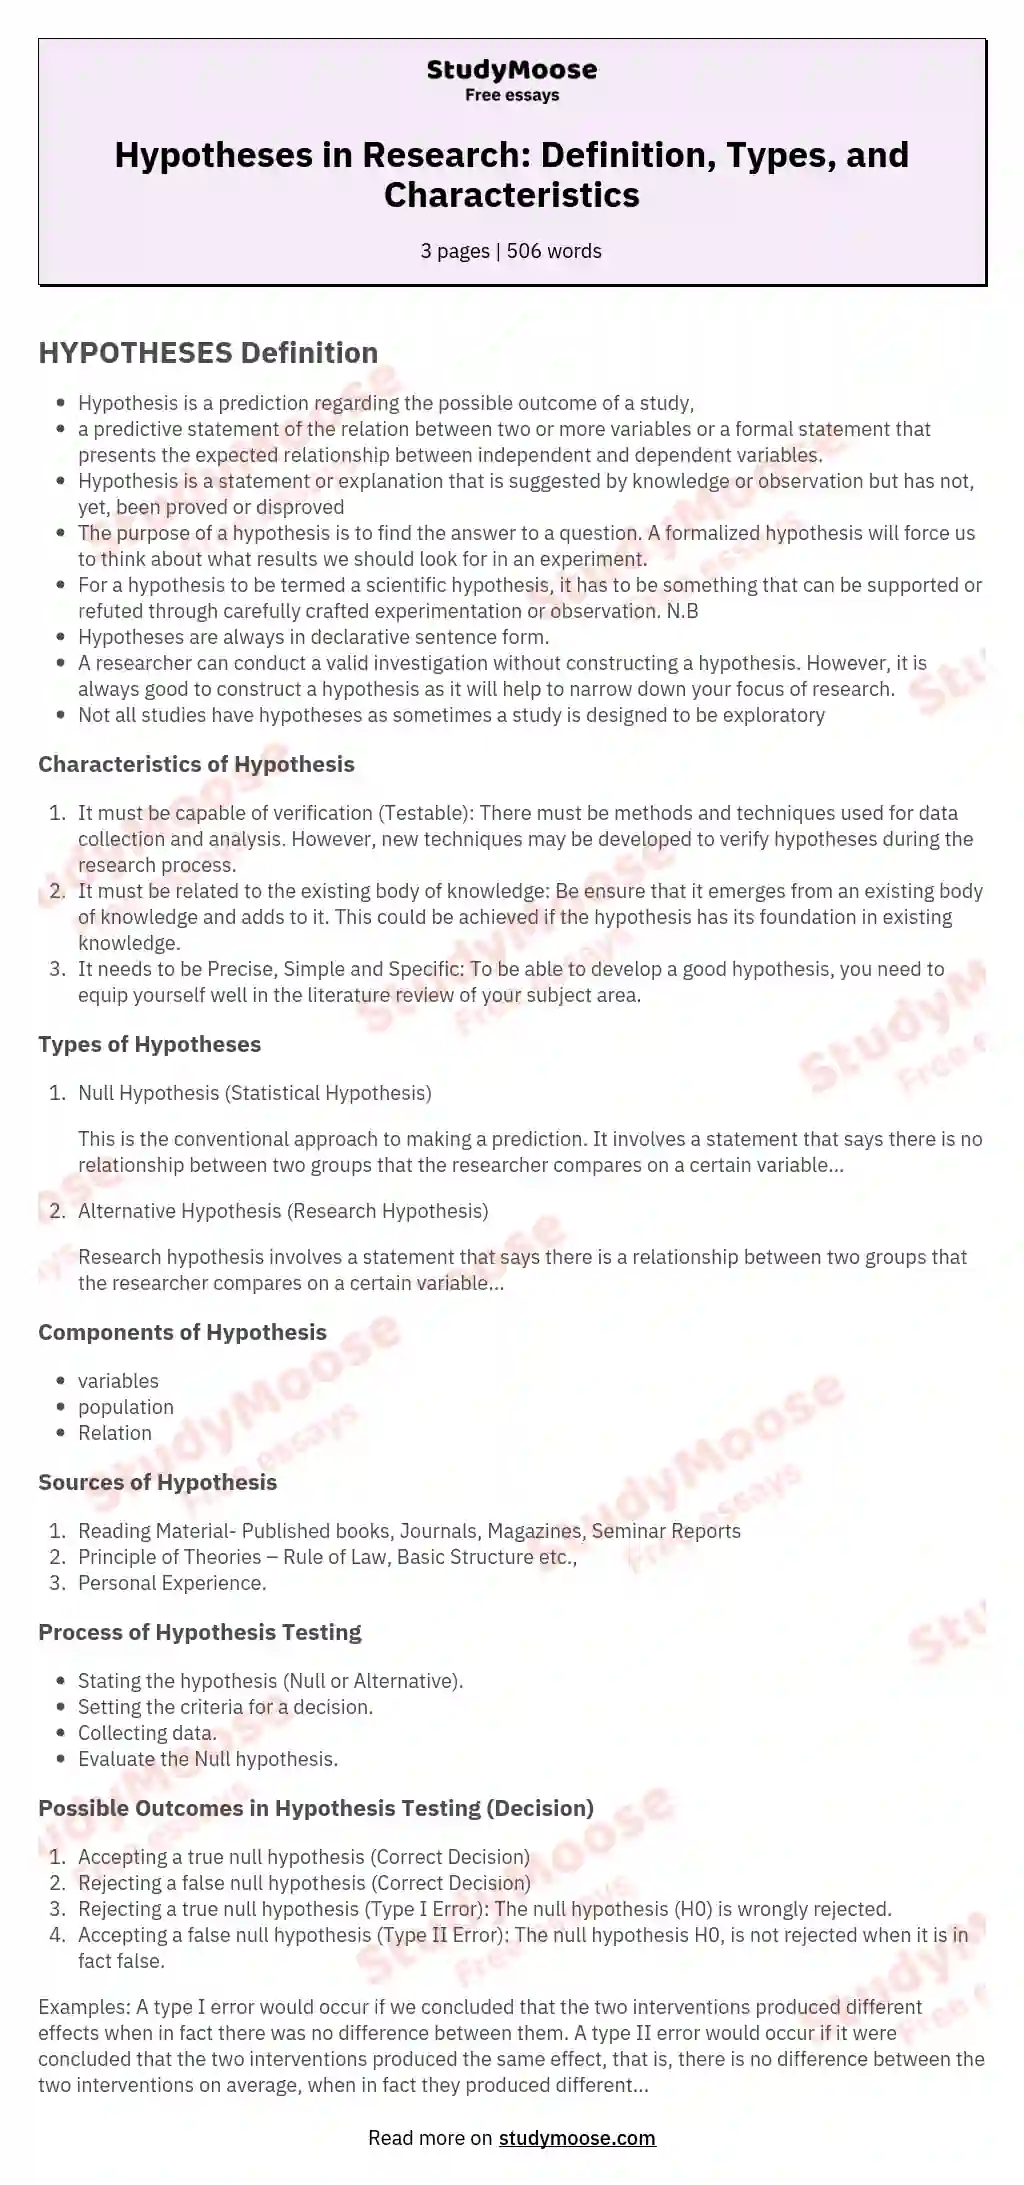 Hypotheses in Research: Definition, Types, and Characteristics essay